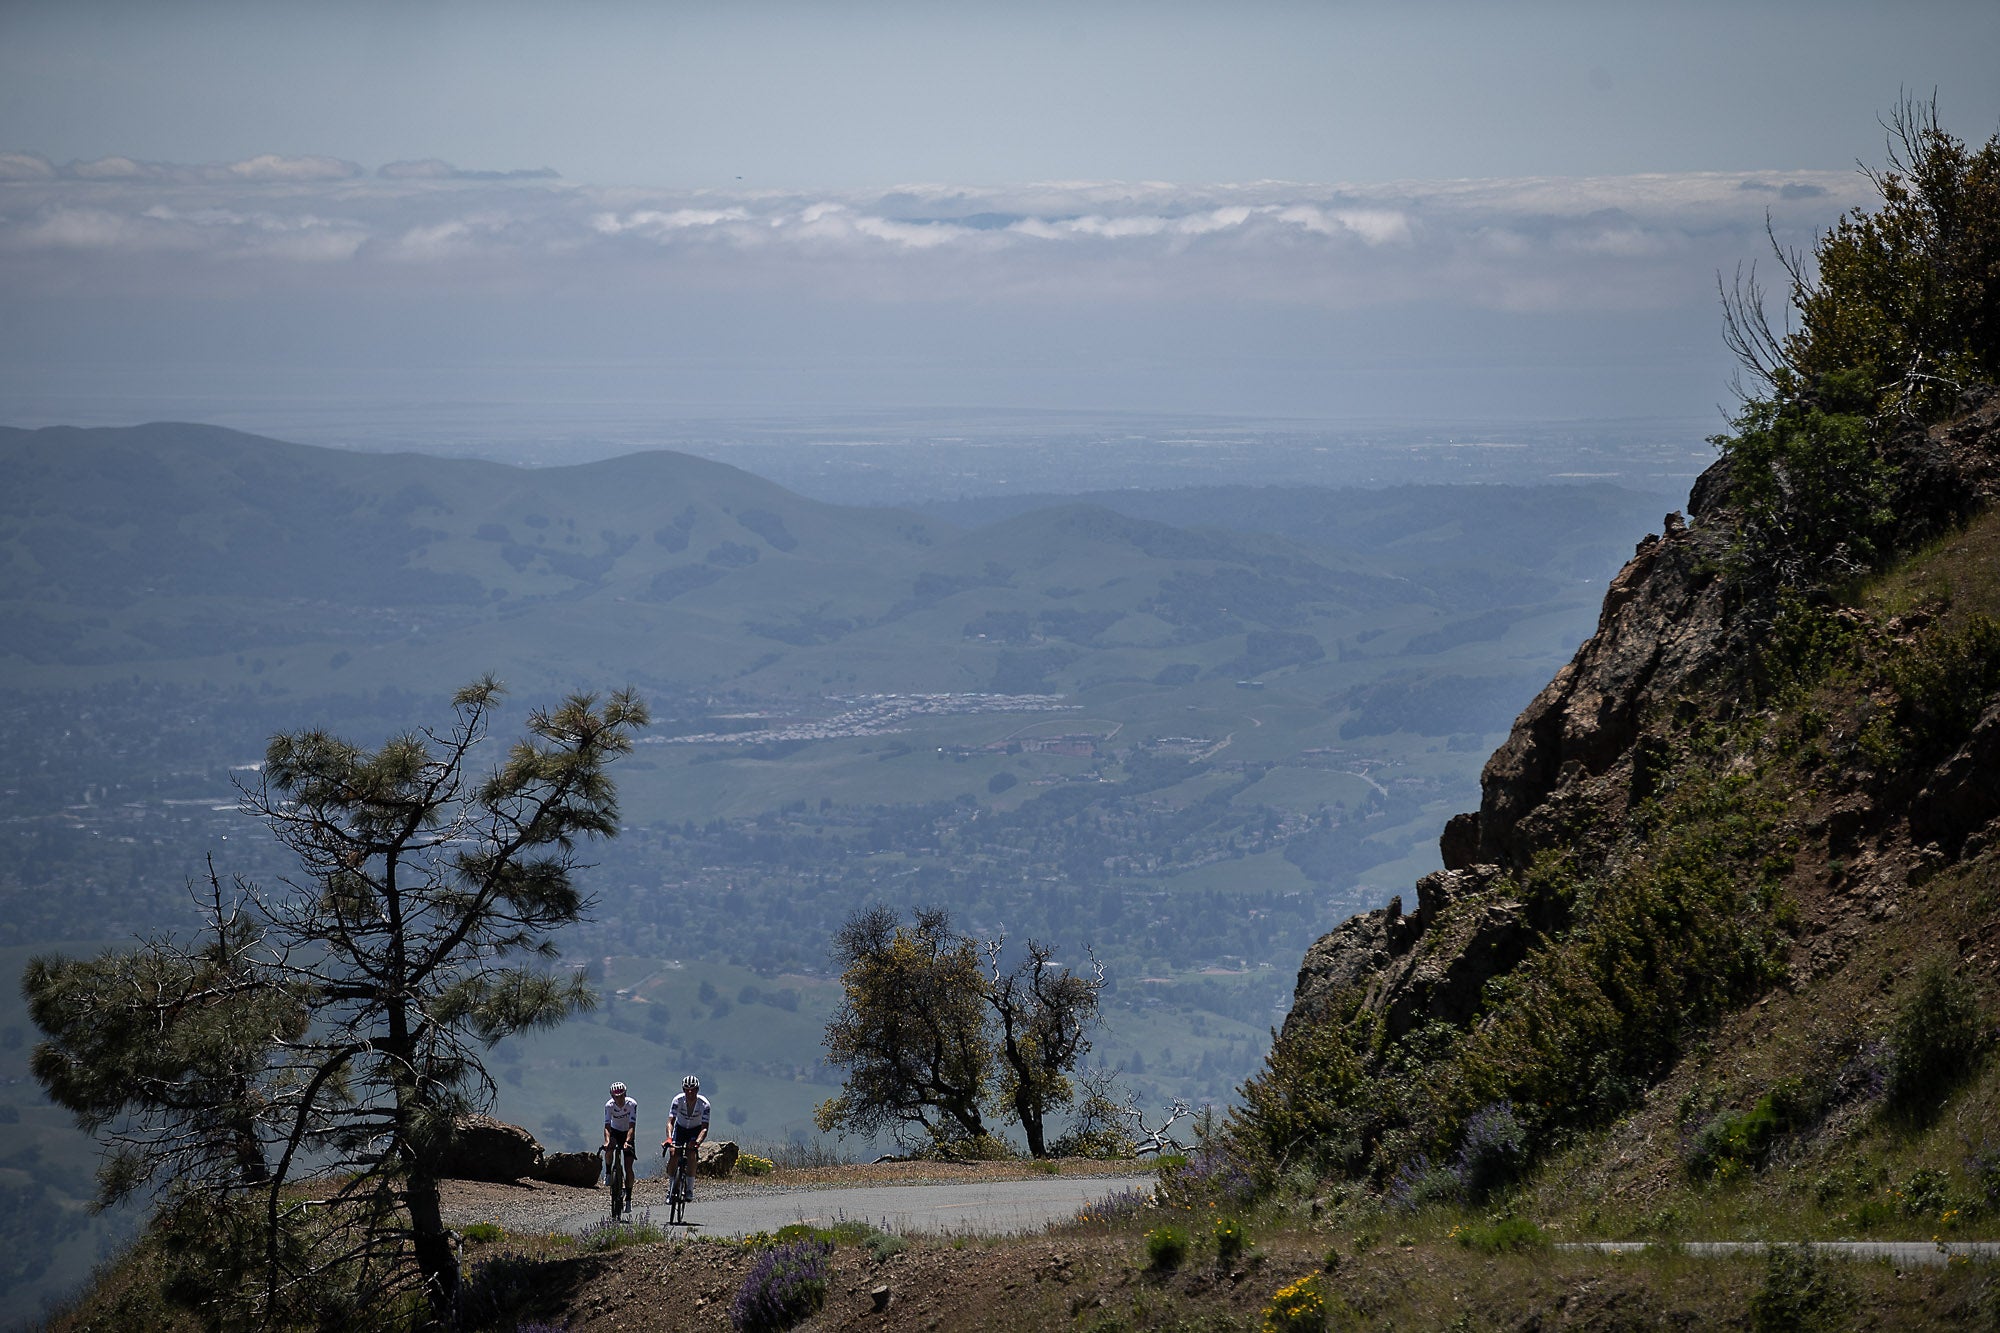 California Climbing: The Best Road Bike Climbs in The Golden State